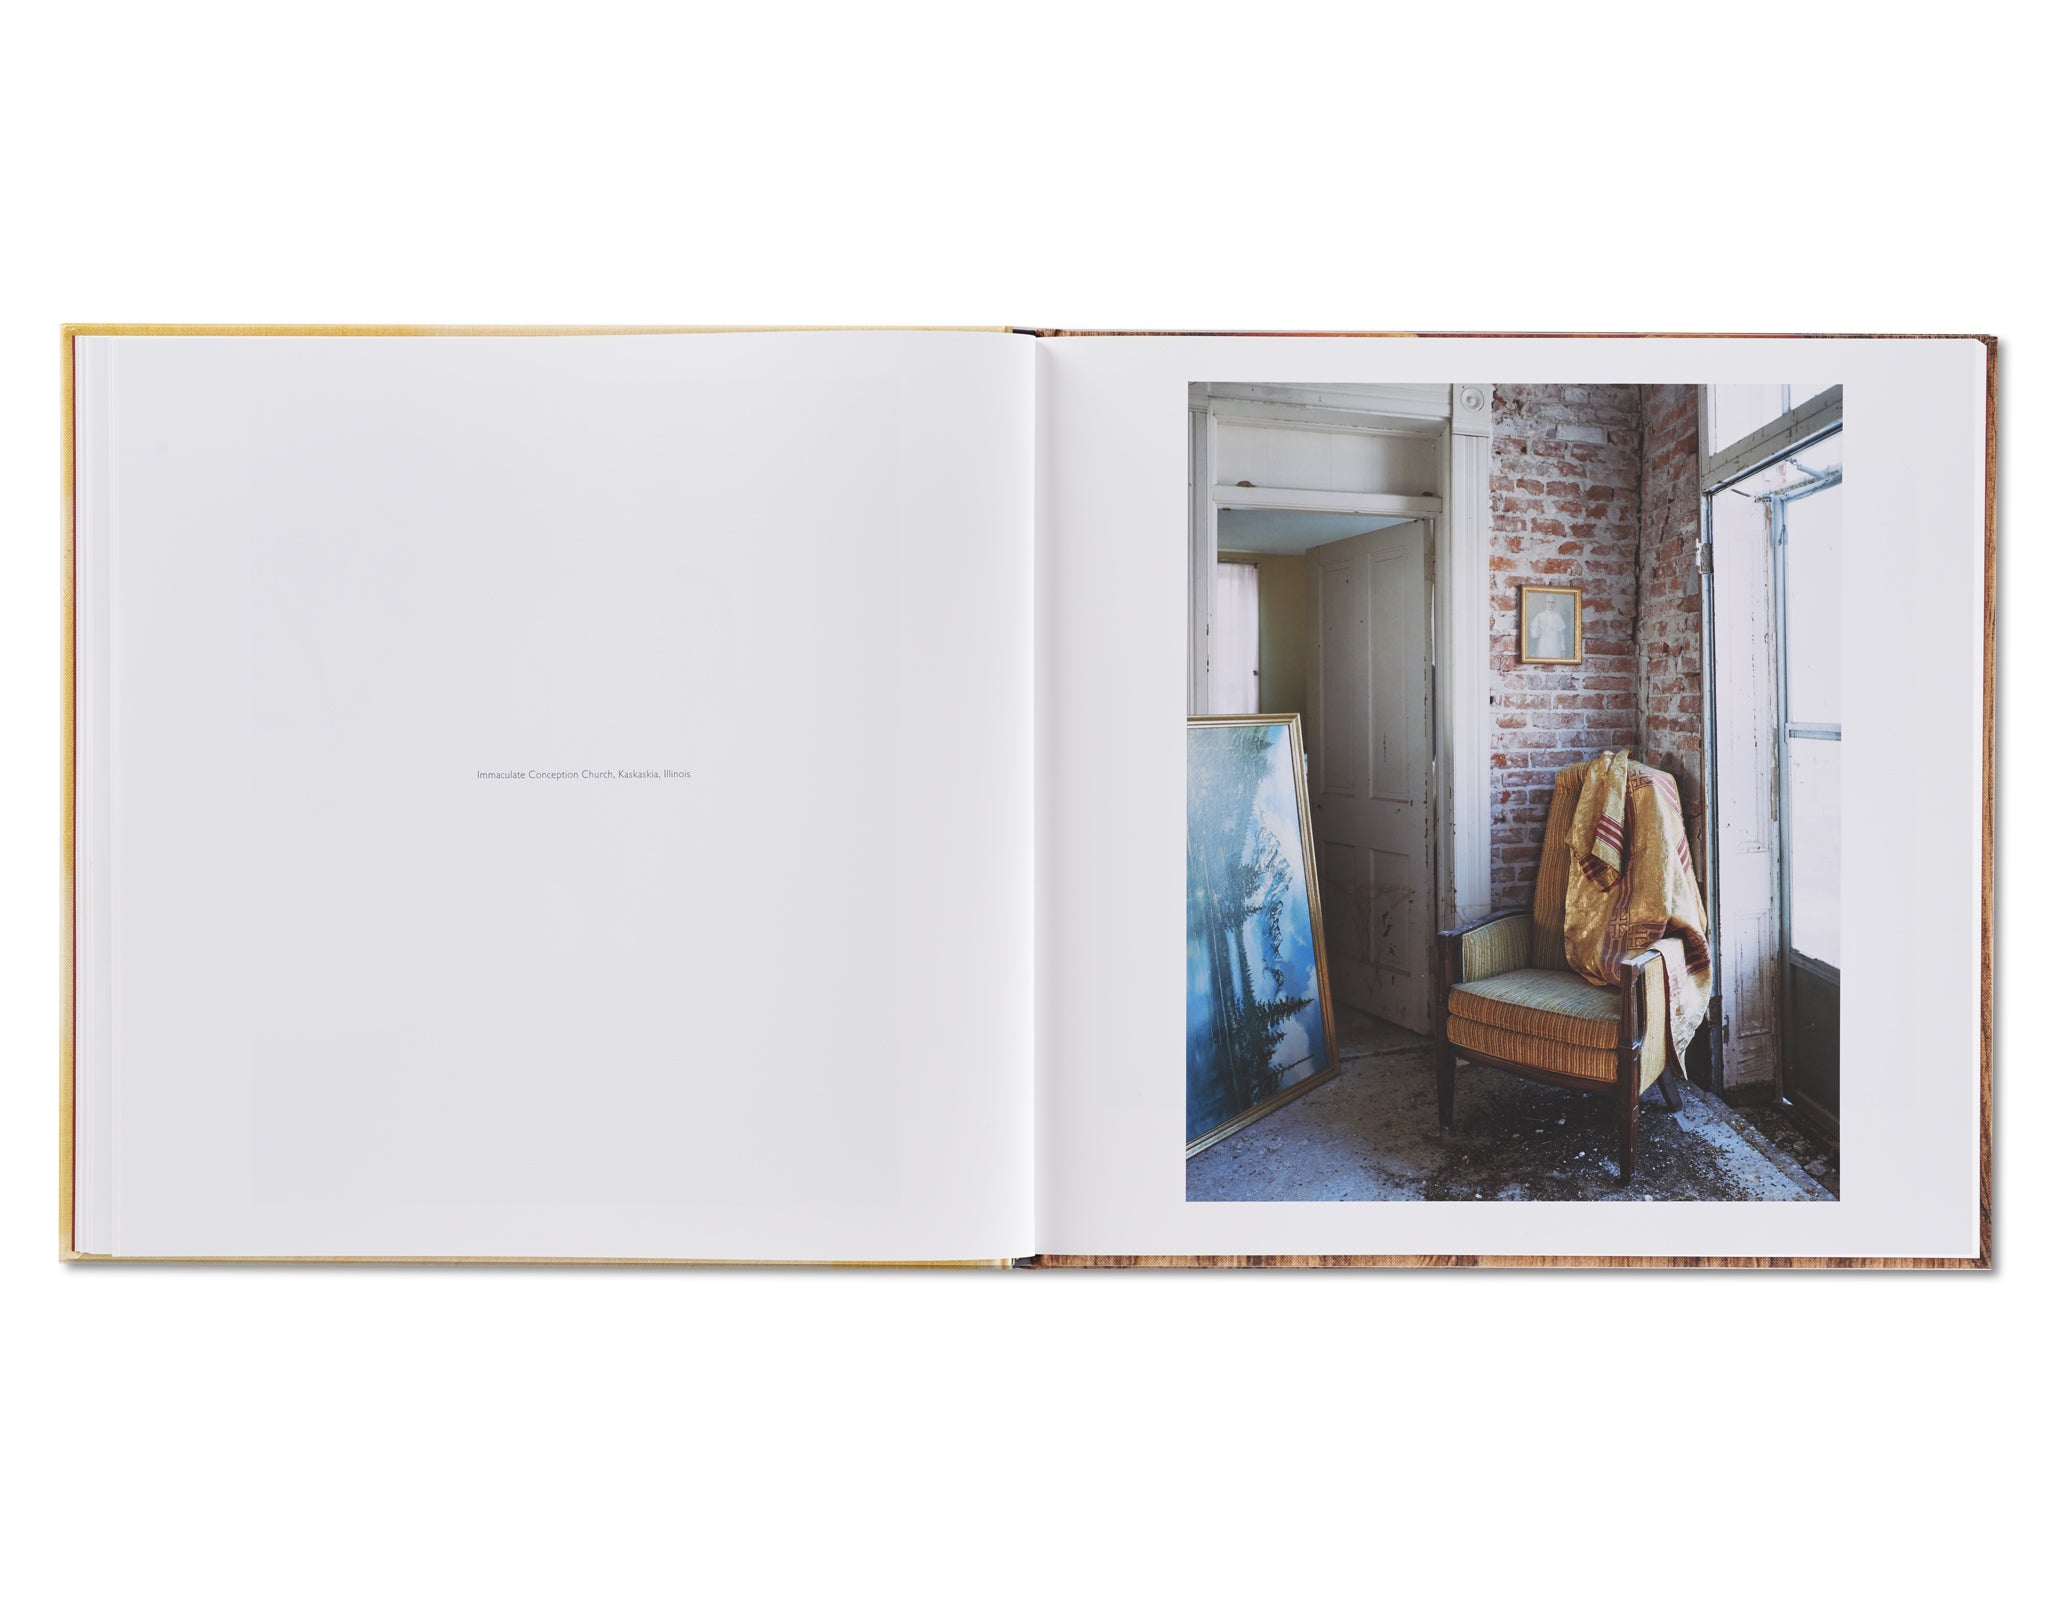 SLEEPING BY THE MISSISSIPPI by Alec Soth [SPECIAL EDITION]